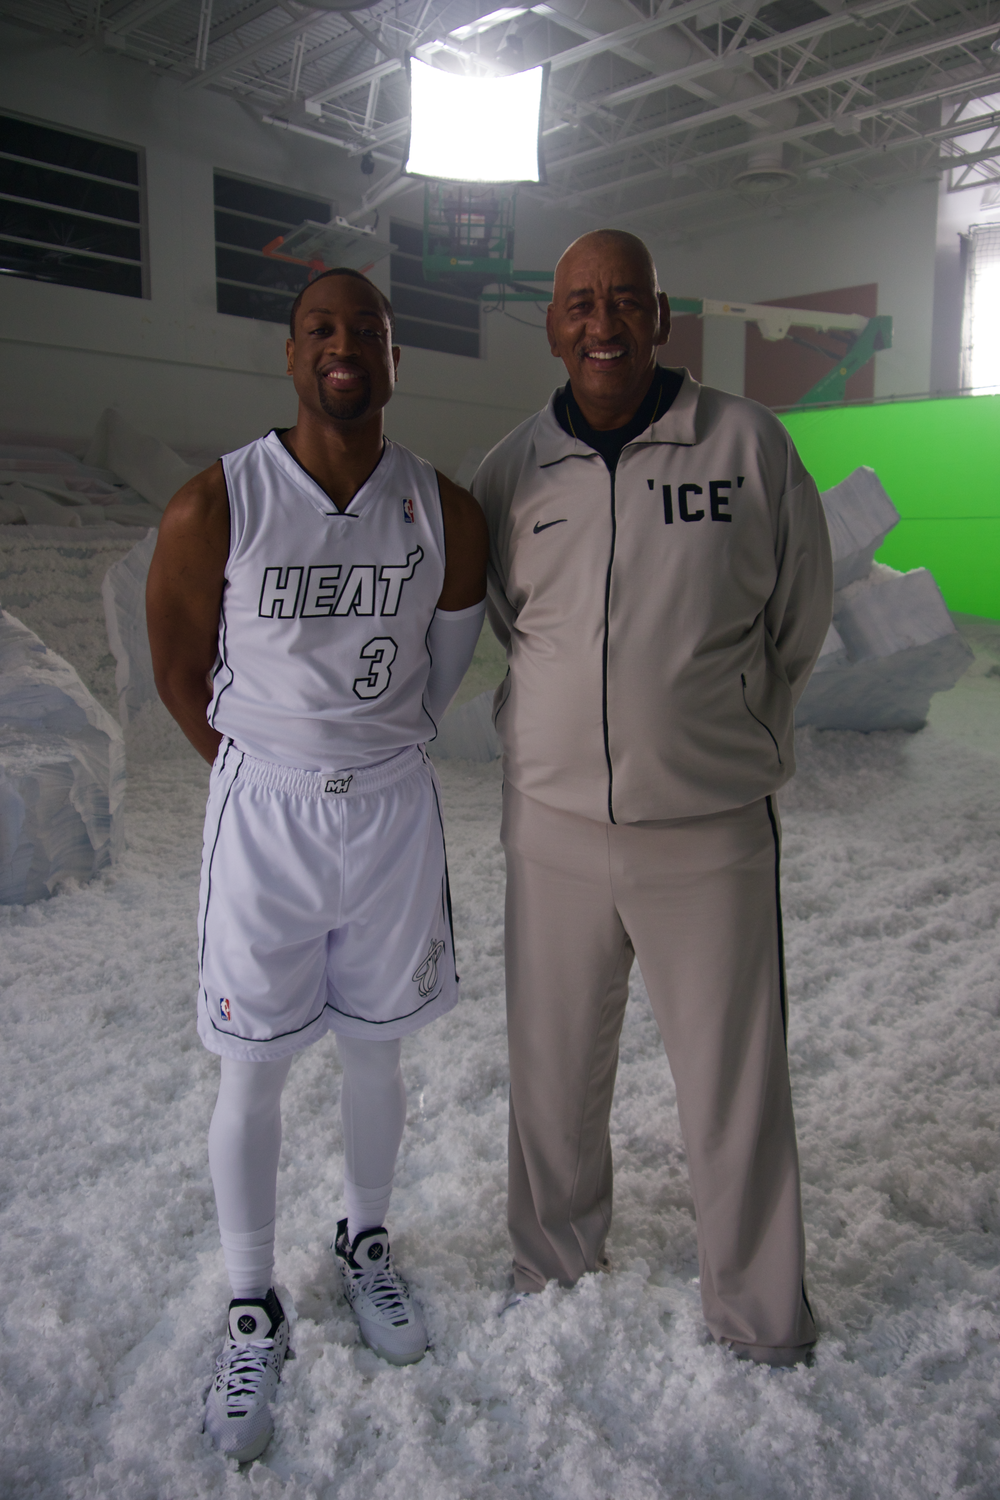 Dwyane Wade poses with NBA legend George "Ice Man" Gervin during a Gatorade commercial shoot. (Source: SB Nation/Hot Hot Hoops. Credt Surya Fernandez)